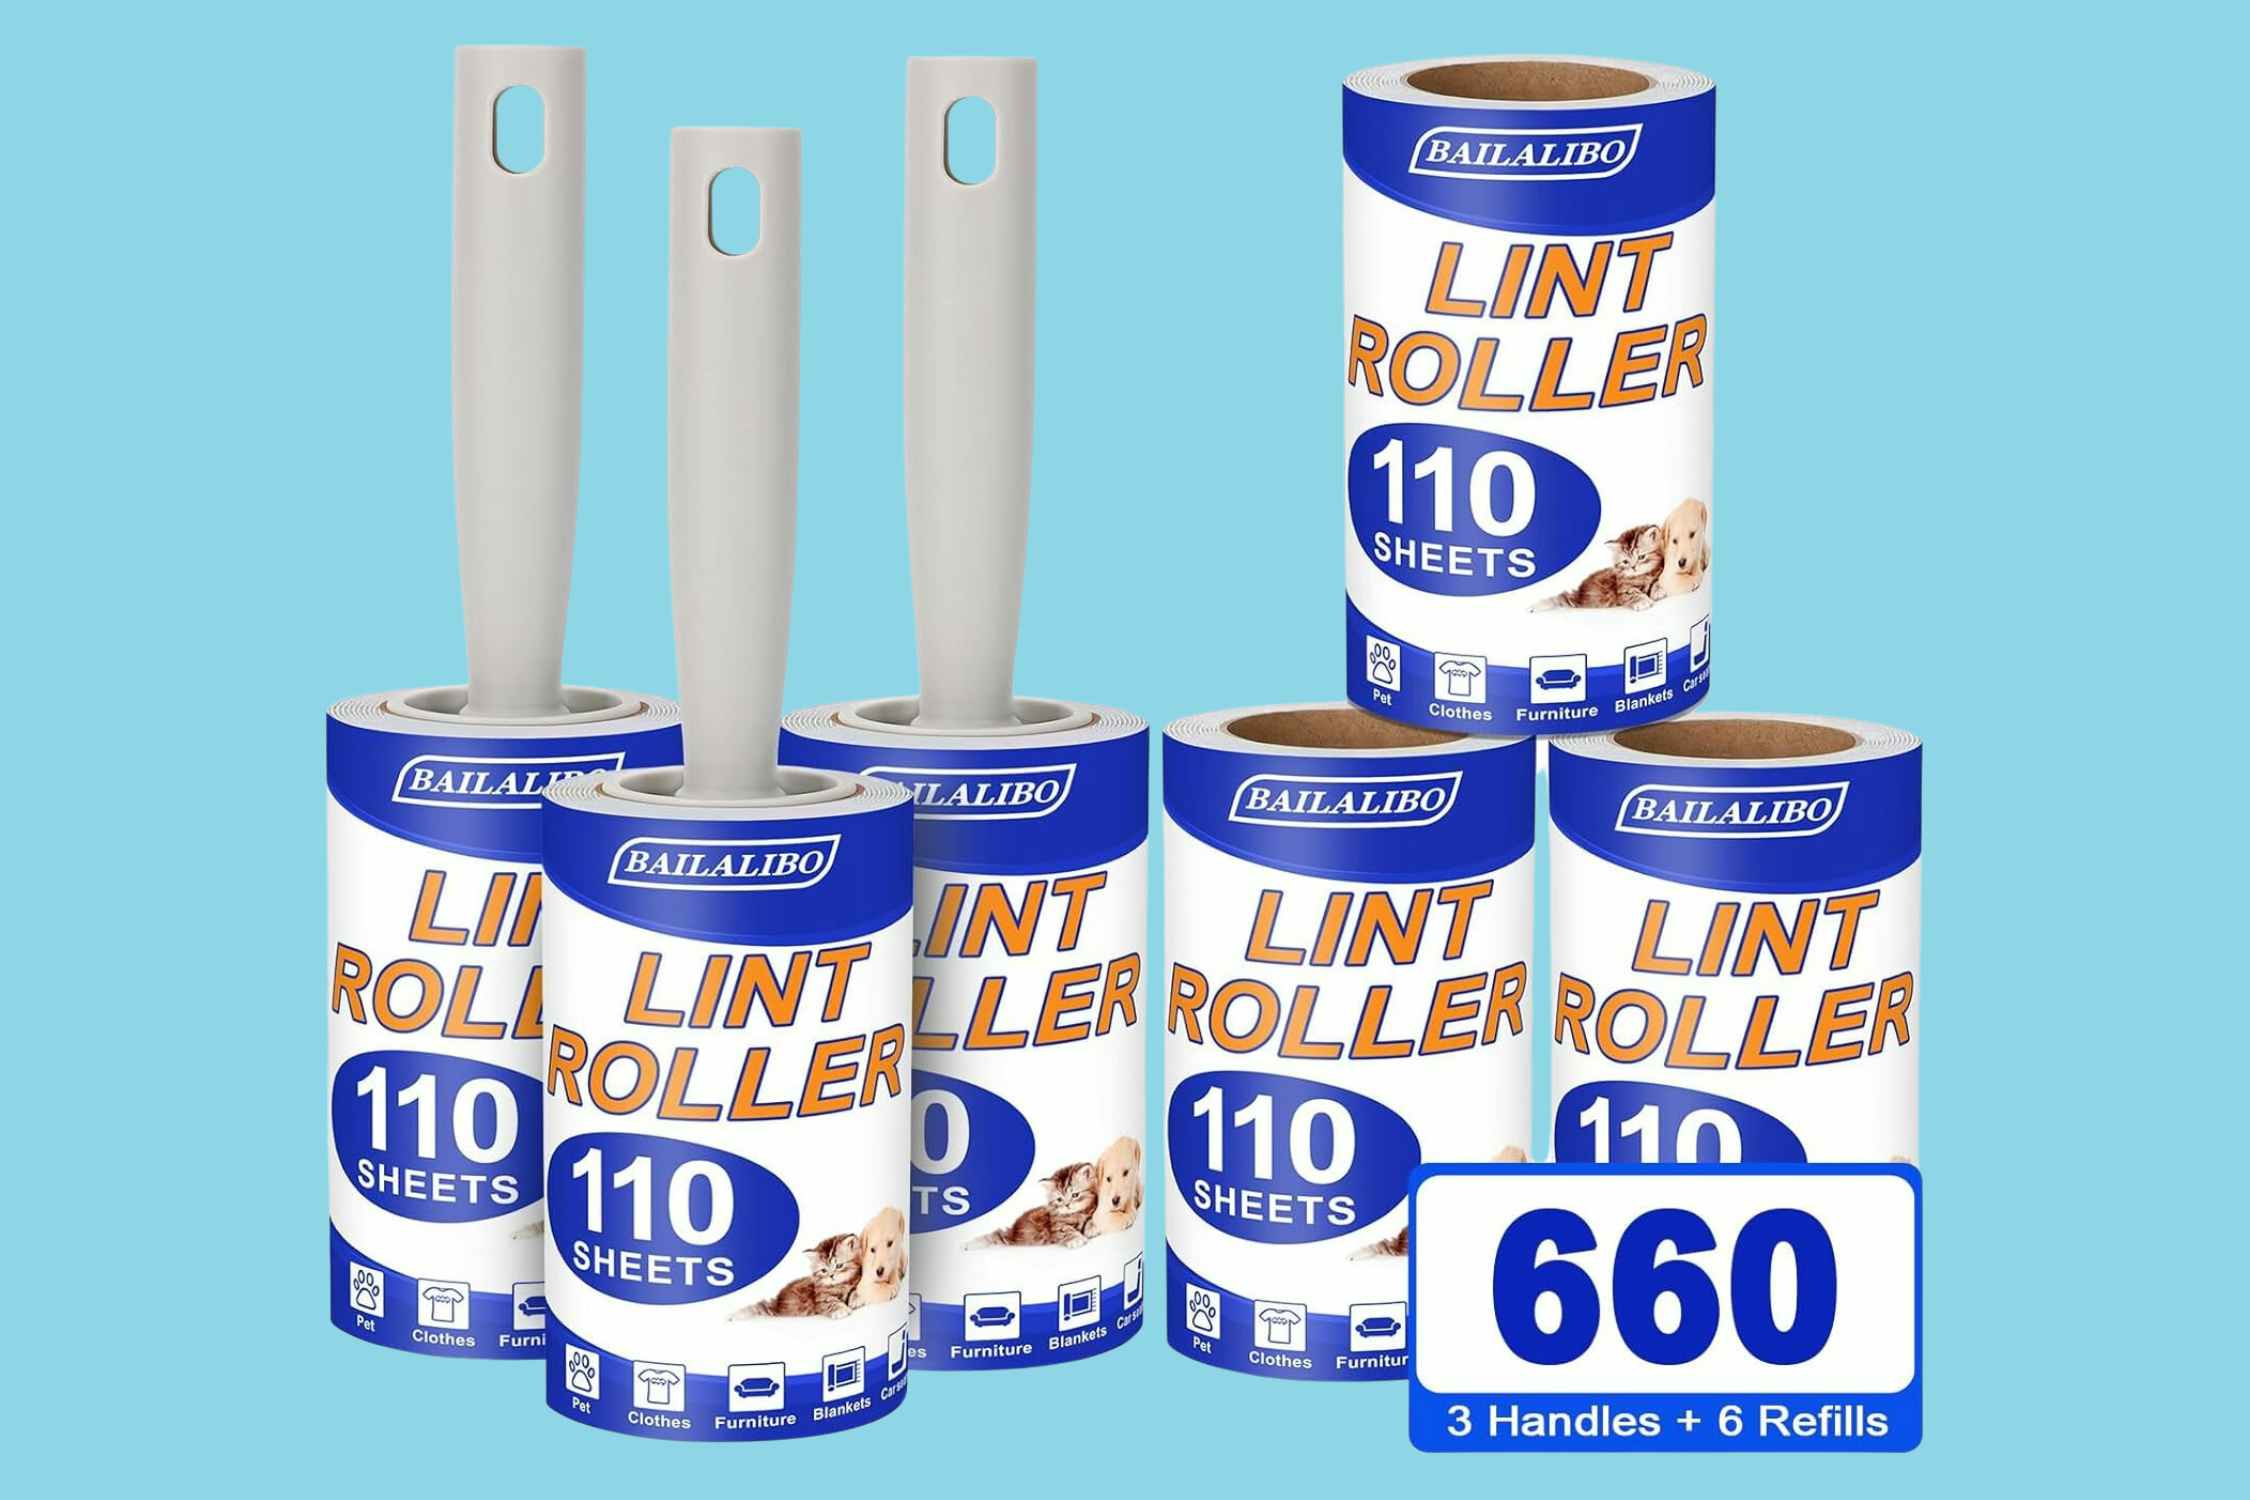 Lint Rollers: Get 3 Rollers and 6 Refills for $8.99 on Amazon